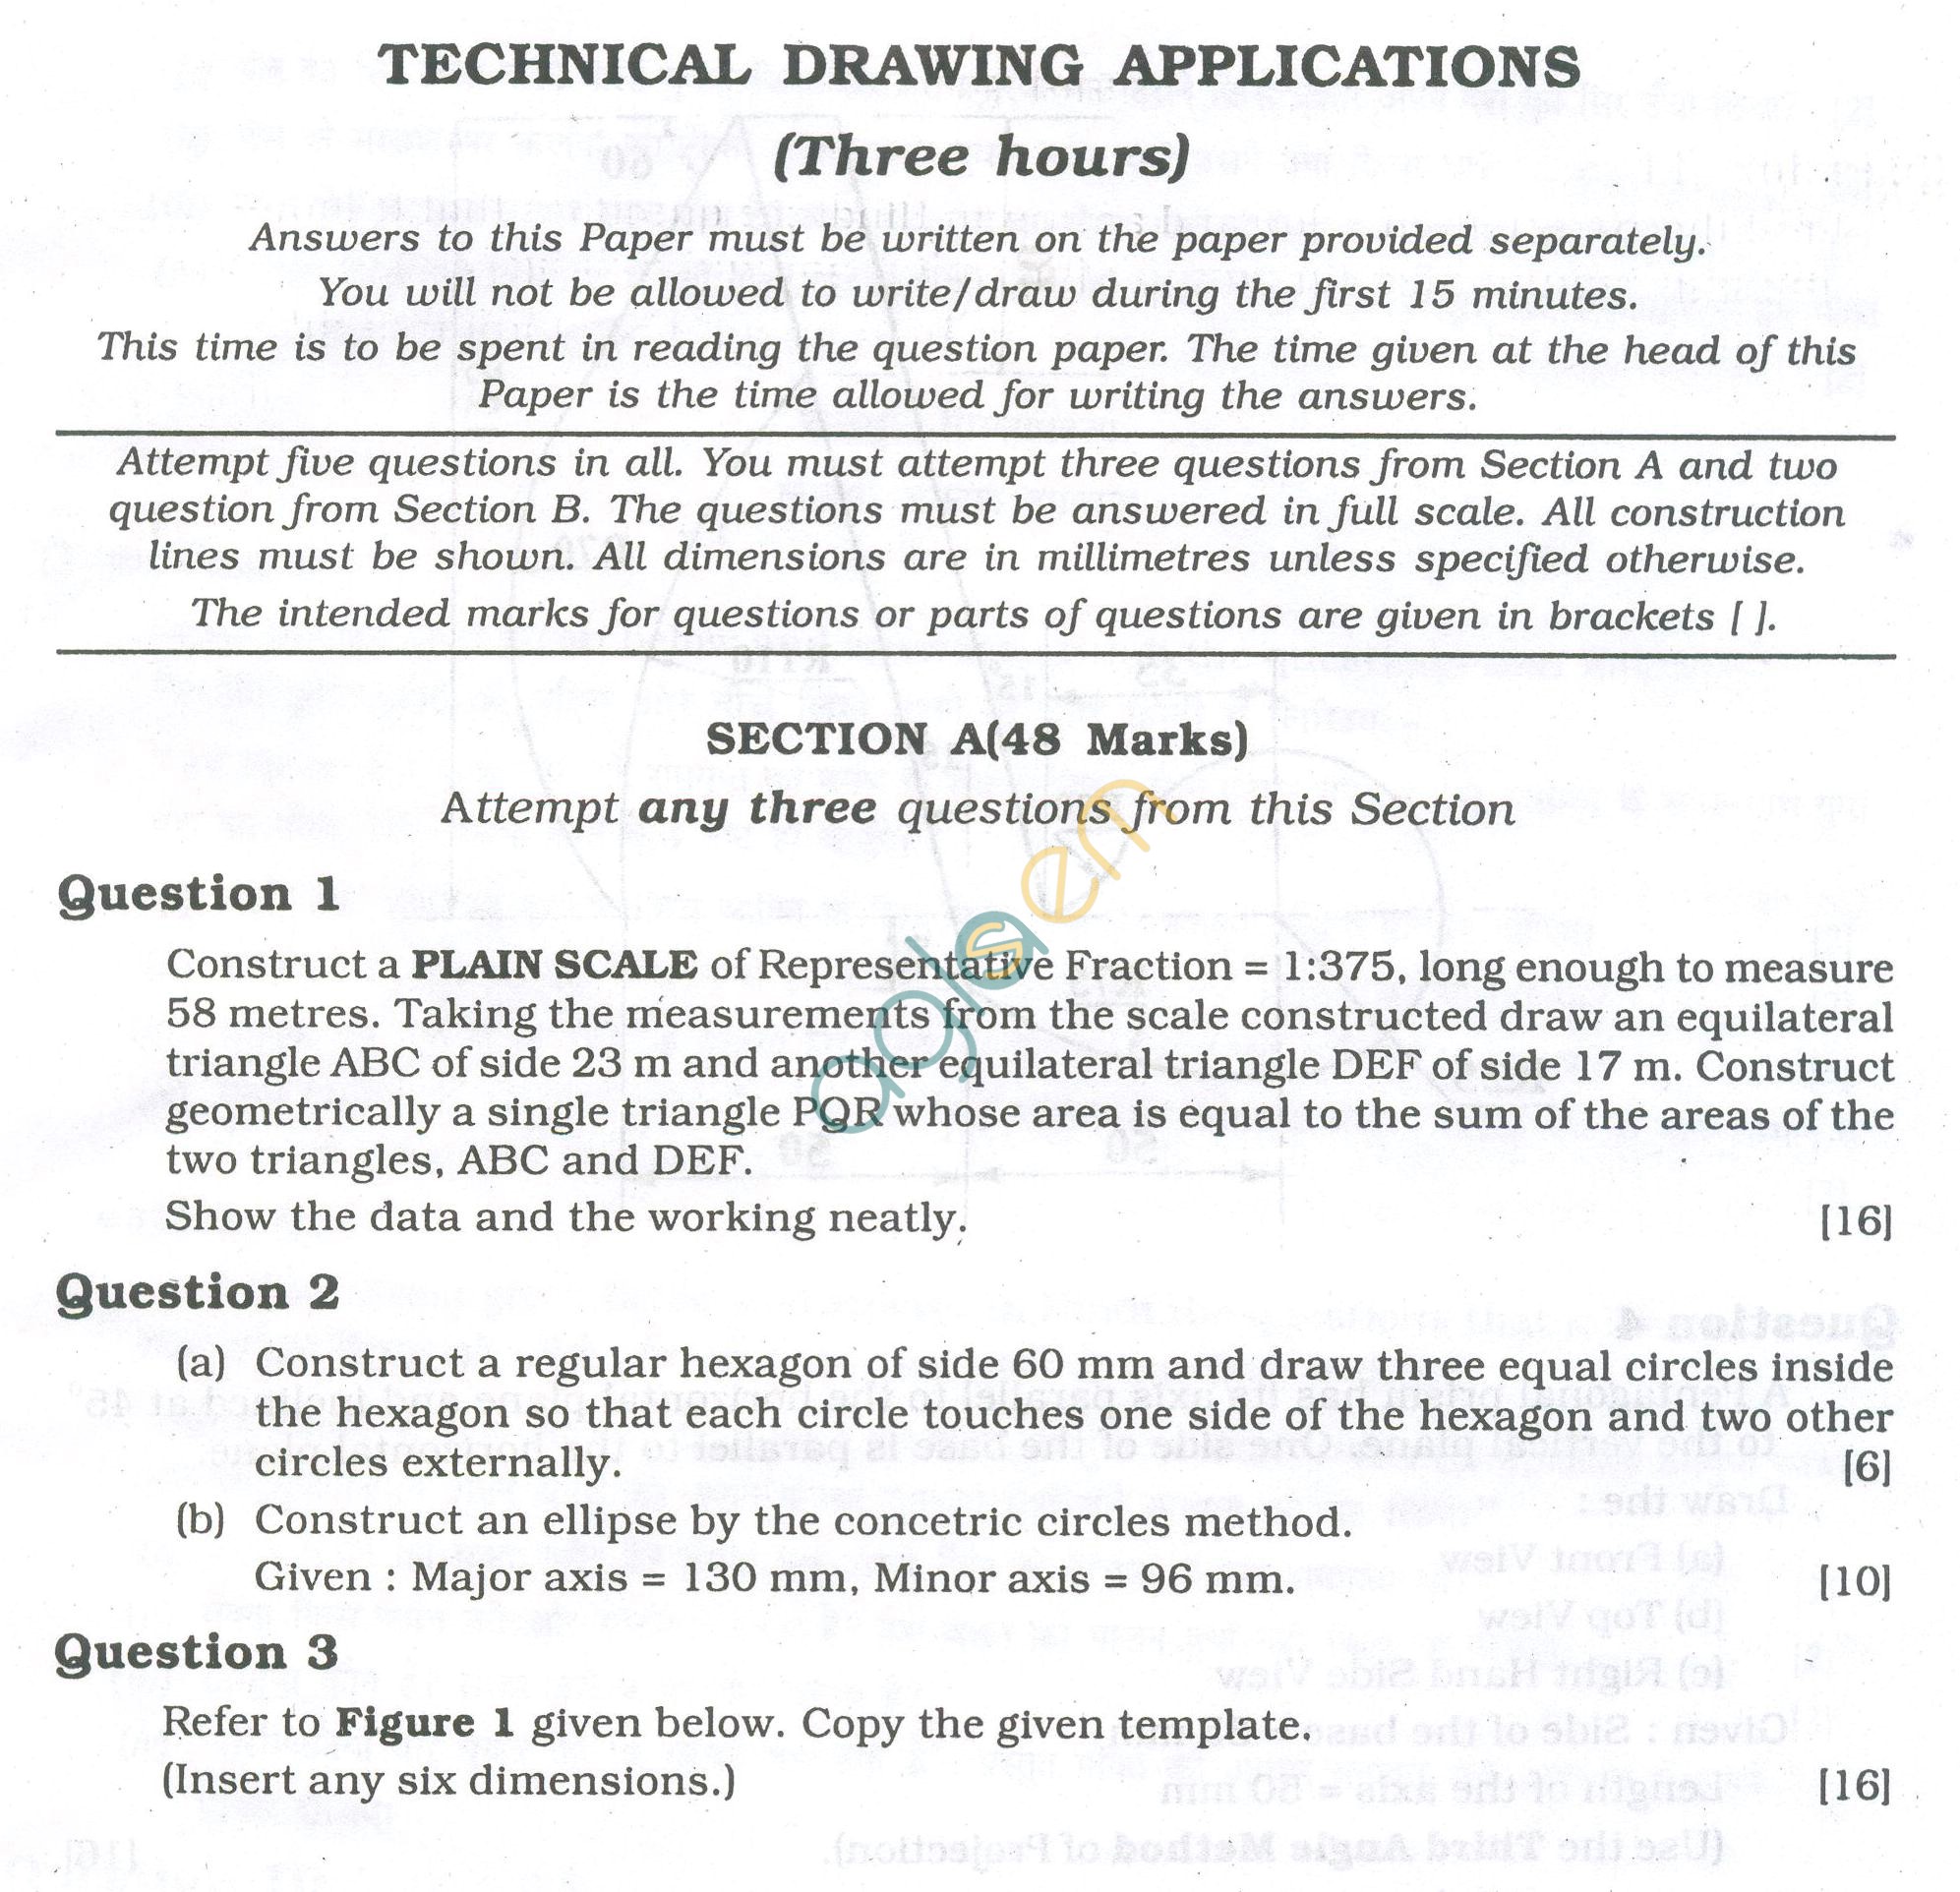 ICSE Question Papers 2013 for Class 10 - Technical Drawing Applications/